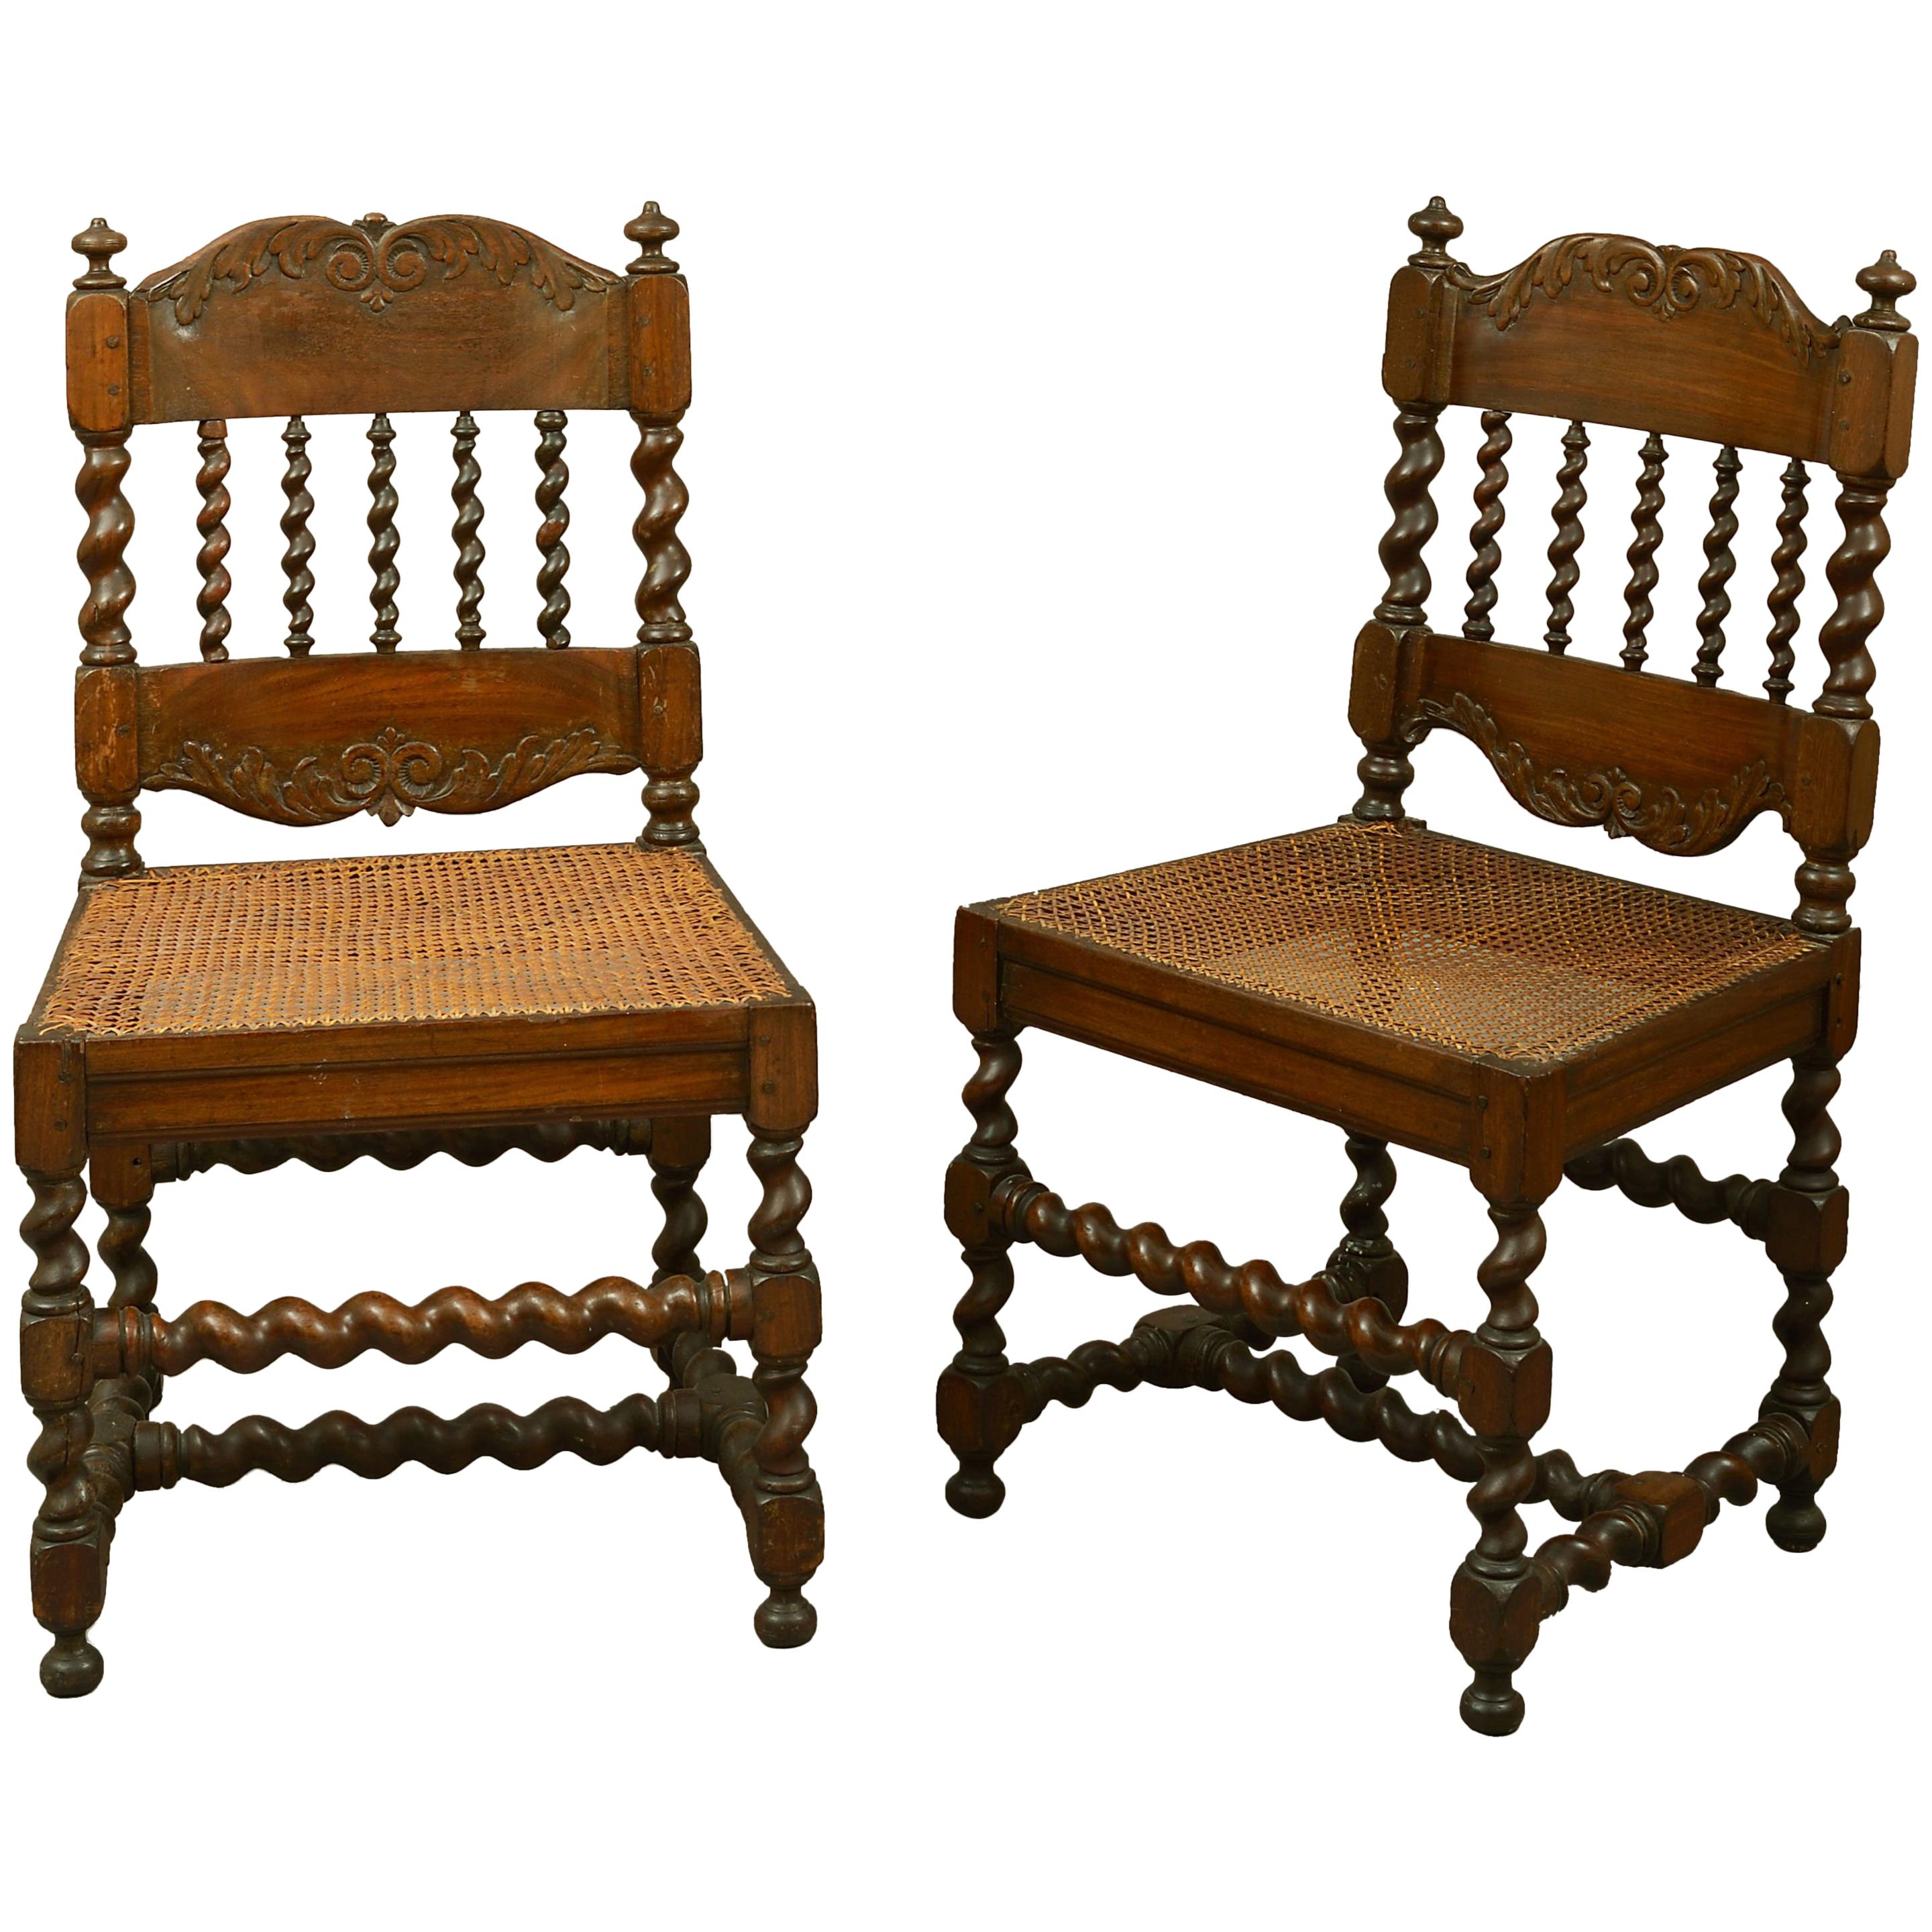 Early 18th Century Pair of Cape Dutch Stinkwood Chairs